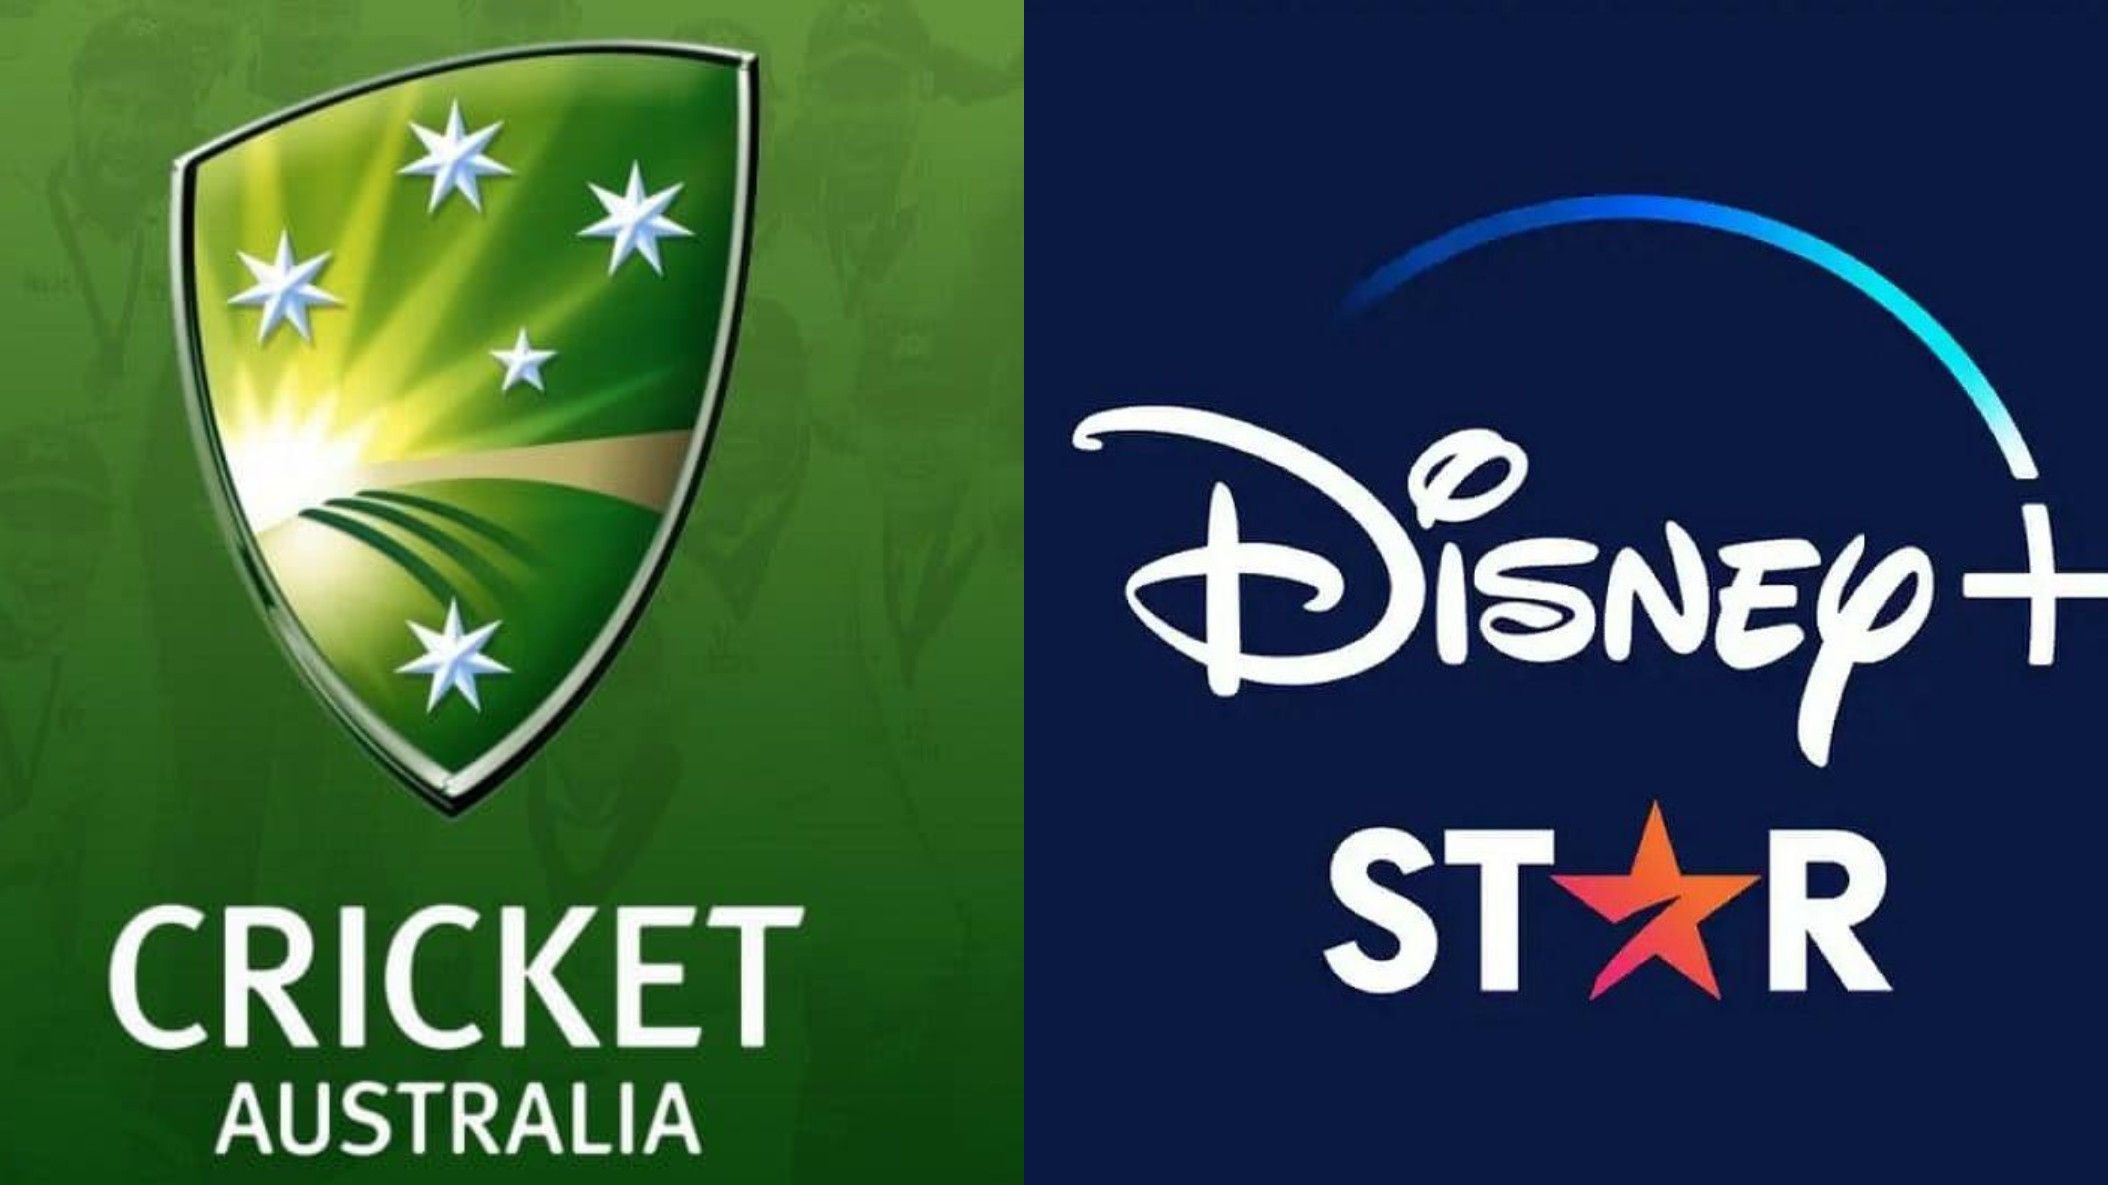 Cricket Australia inks 7-year deal with Disney Star to broadcast matches in India